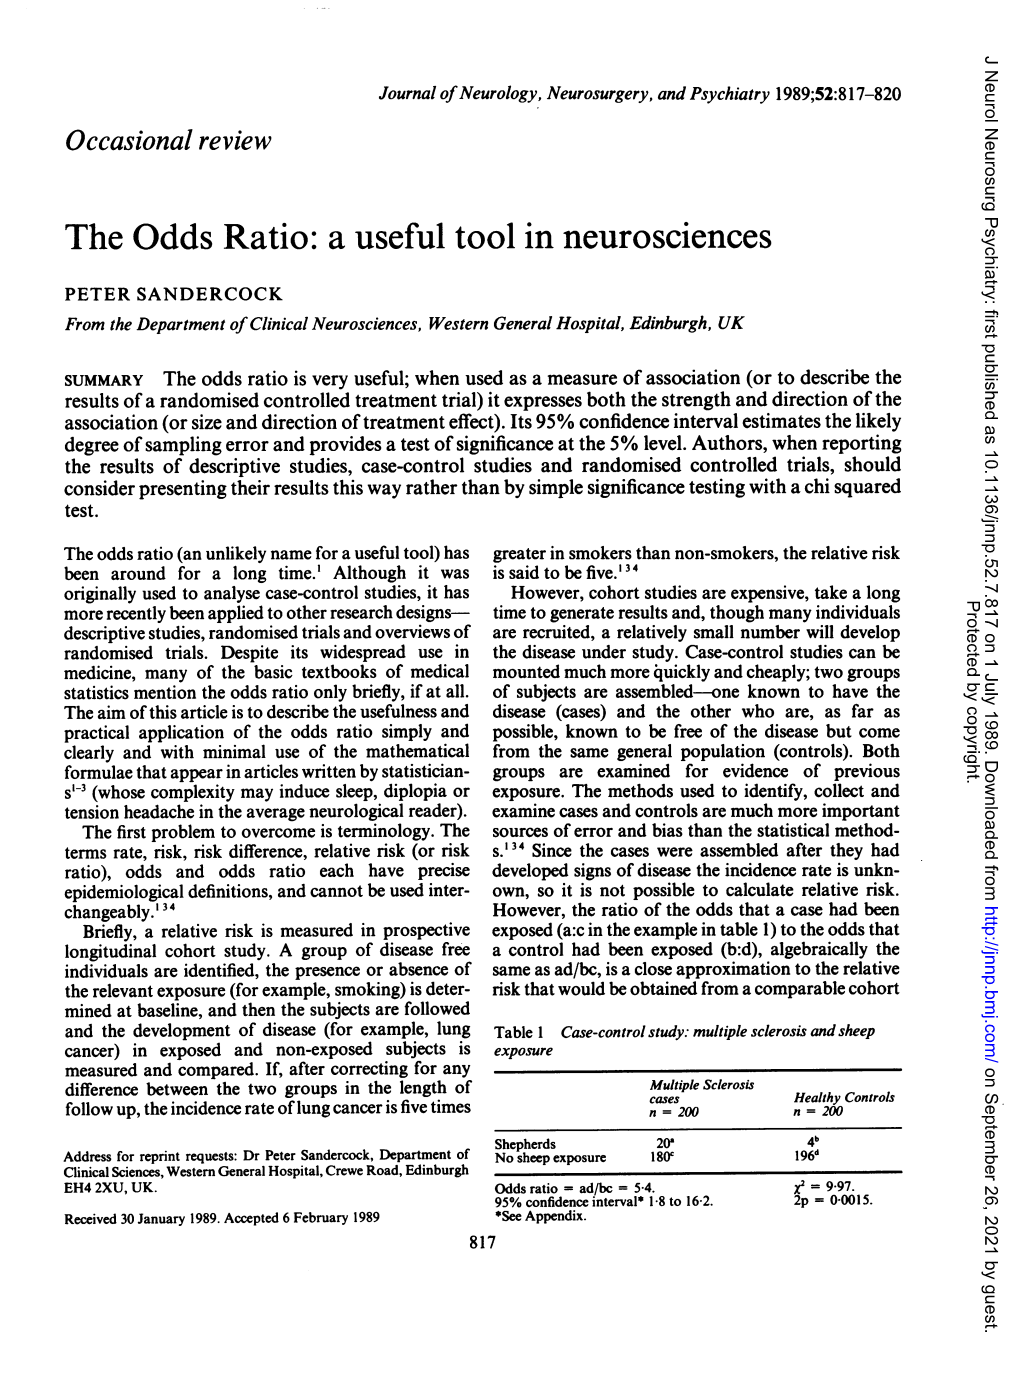 The Odds Ratio: a Useful Tool in Neurosciences